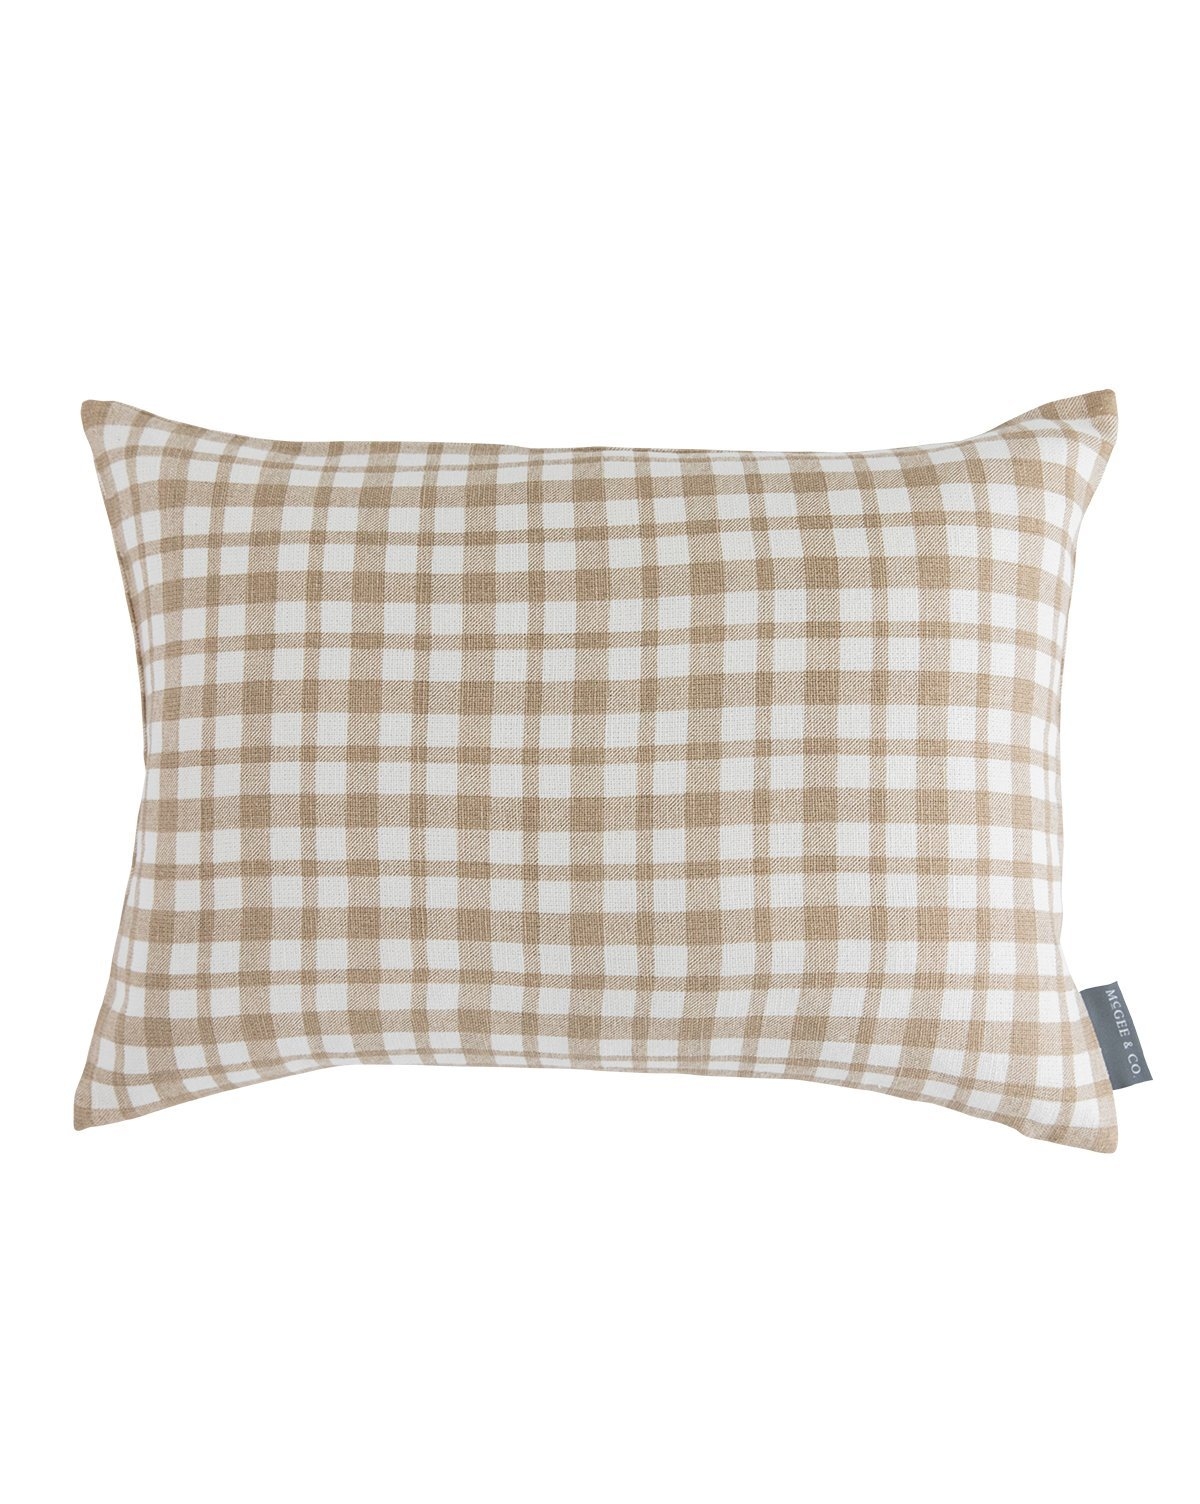 EDISON GINGHAM PILLOW COVER - Image 0